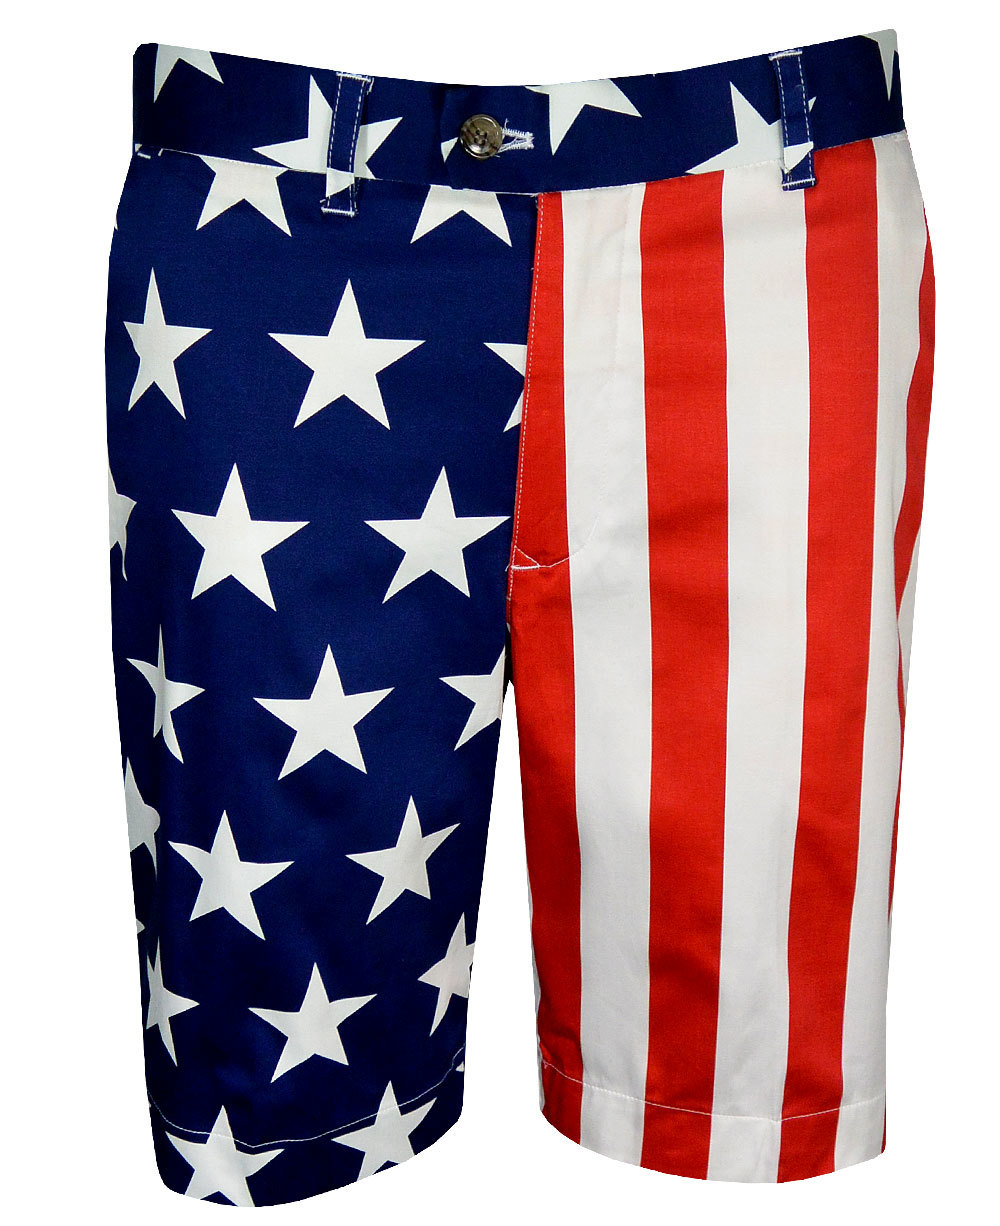 Loudmouth Golf- Stars & Stripes StretchTech Fabric Shorts